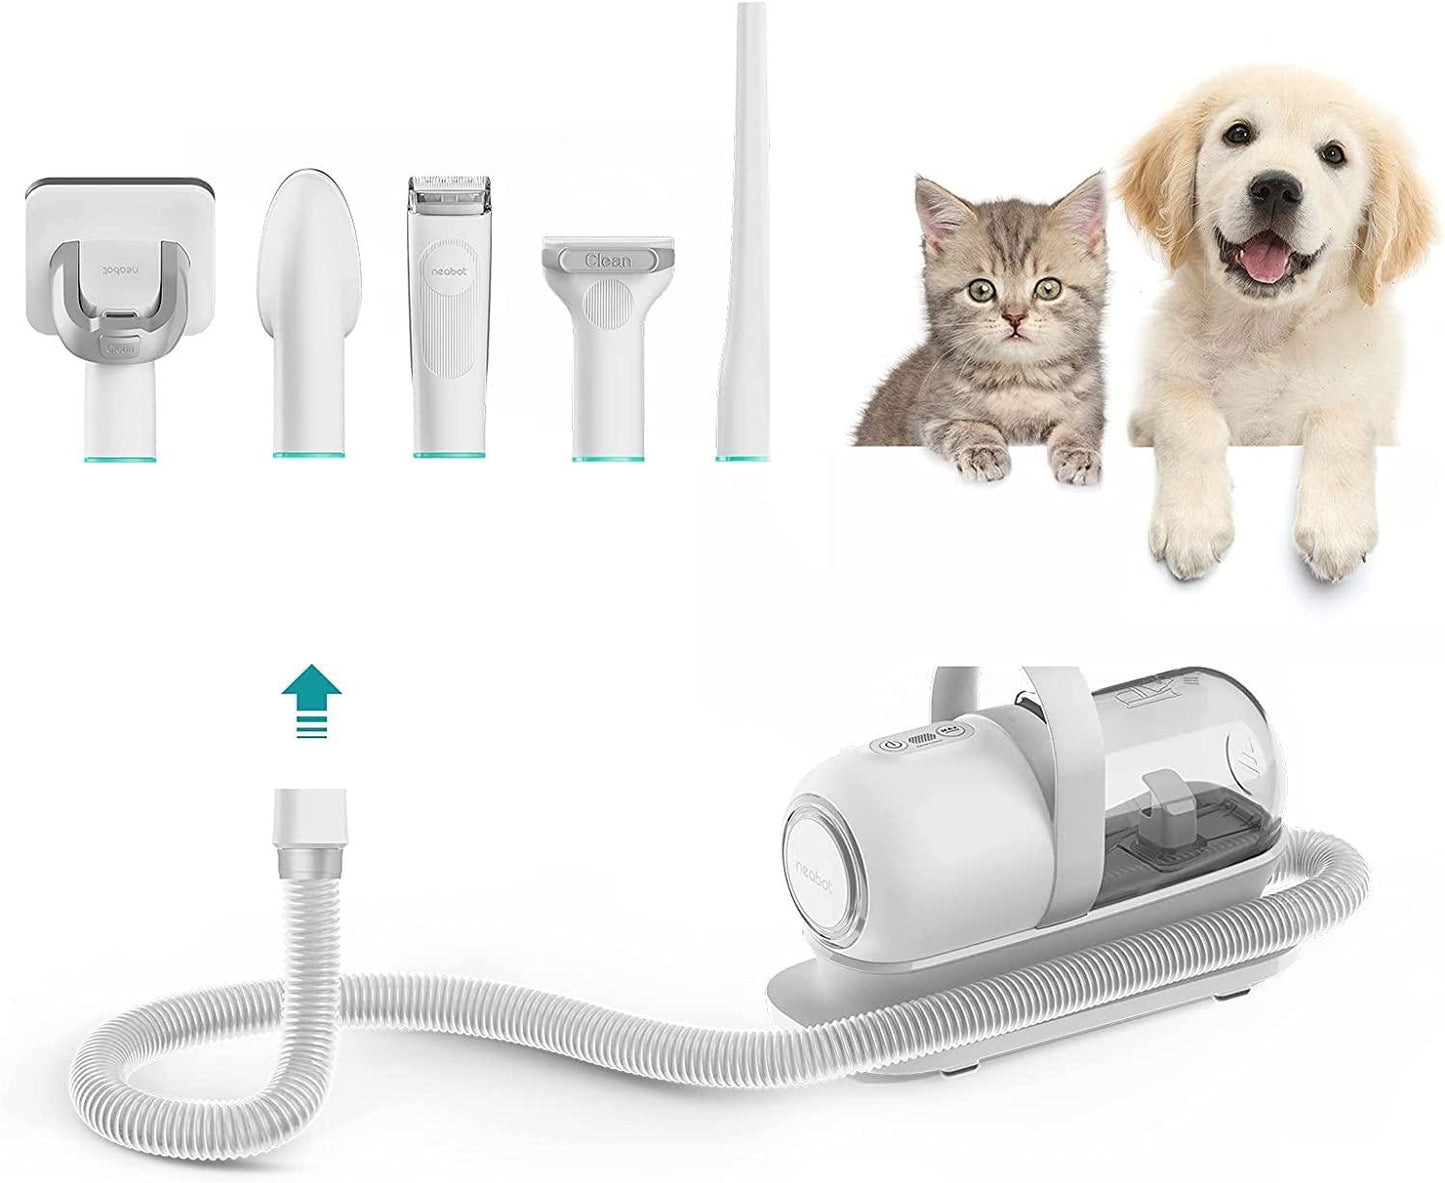 Pro Pet Grooming Kit & Vacuum Pet Hair Remover with Professional Grooming Clippers and Proven Grooming Tools for Dogs Cats and Other Animals - TheGivenGet